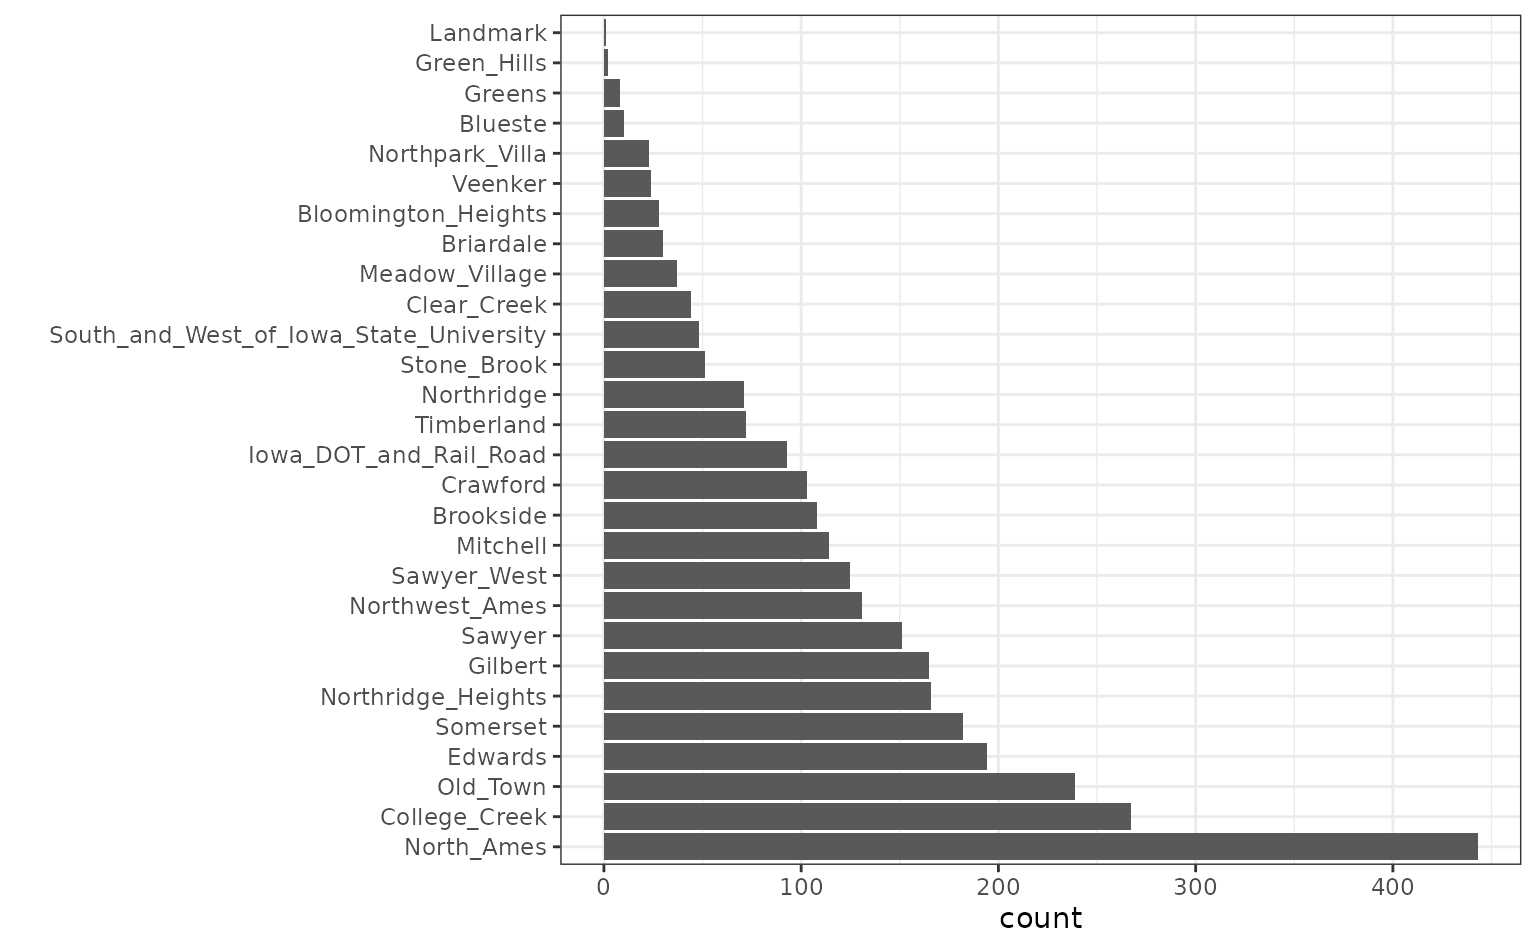 A bar plot of the counts of different neighborhoods, with the frequencies ranging from over 400 observations of North_Ames to only a handful for Green_Hills and Landmark.